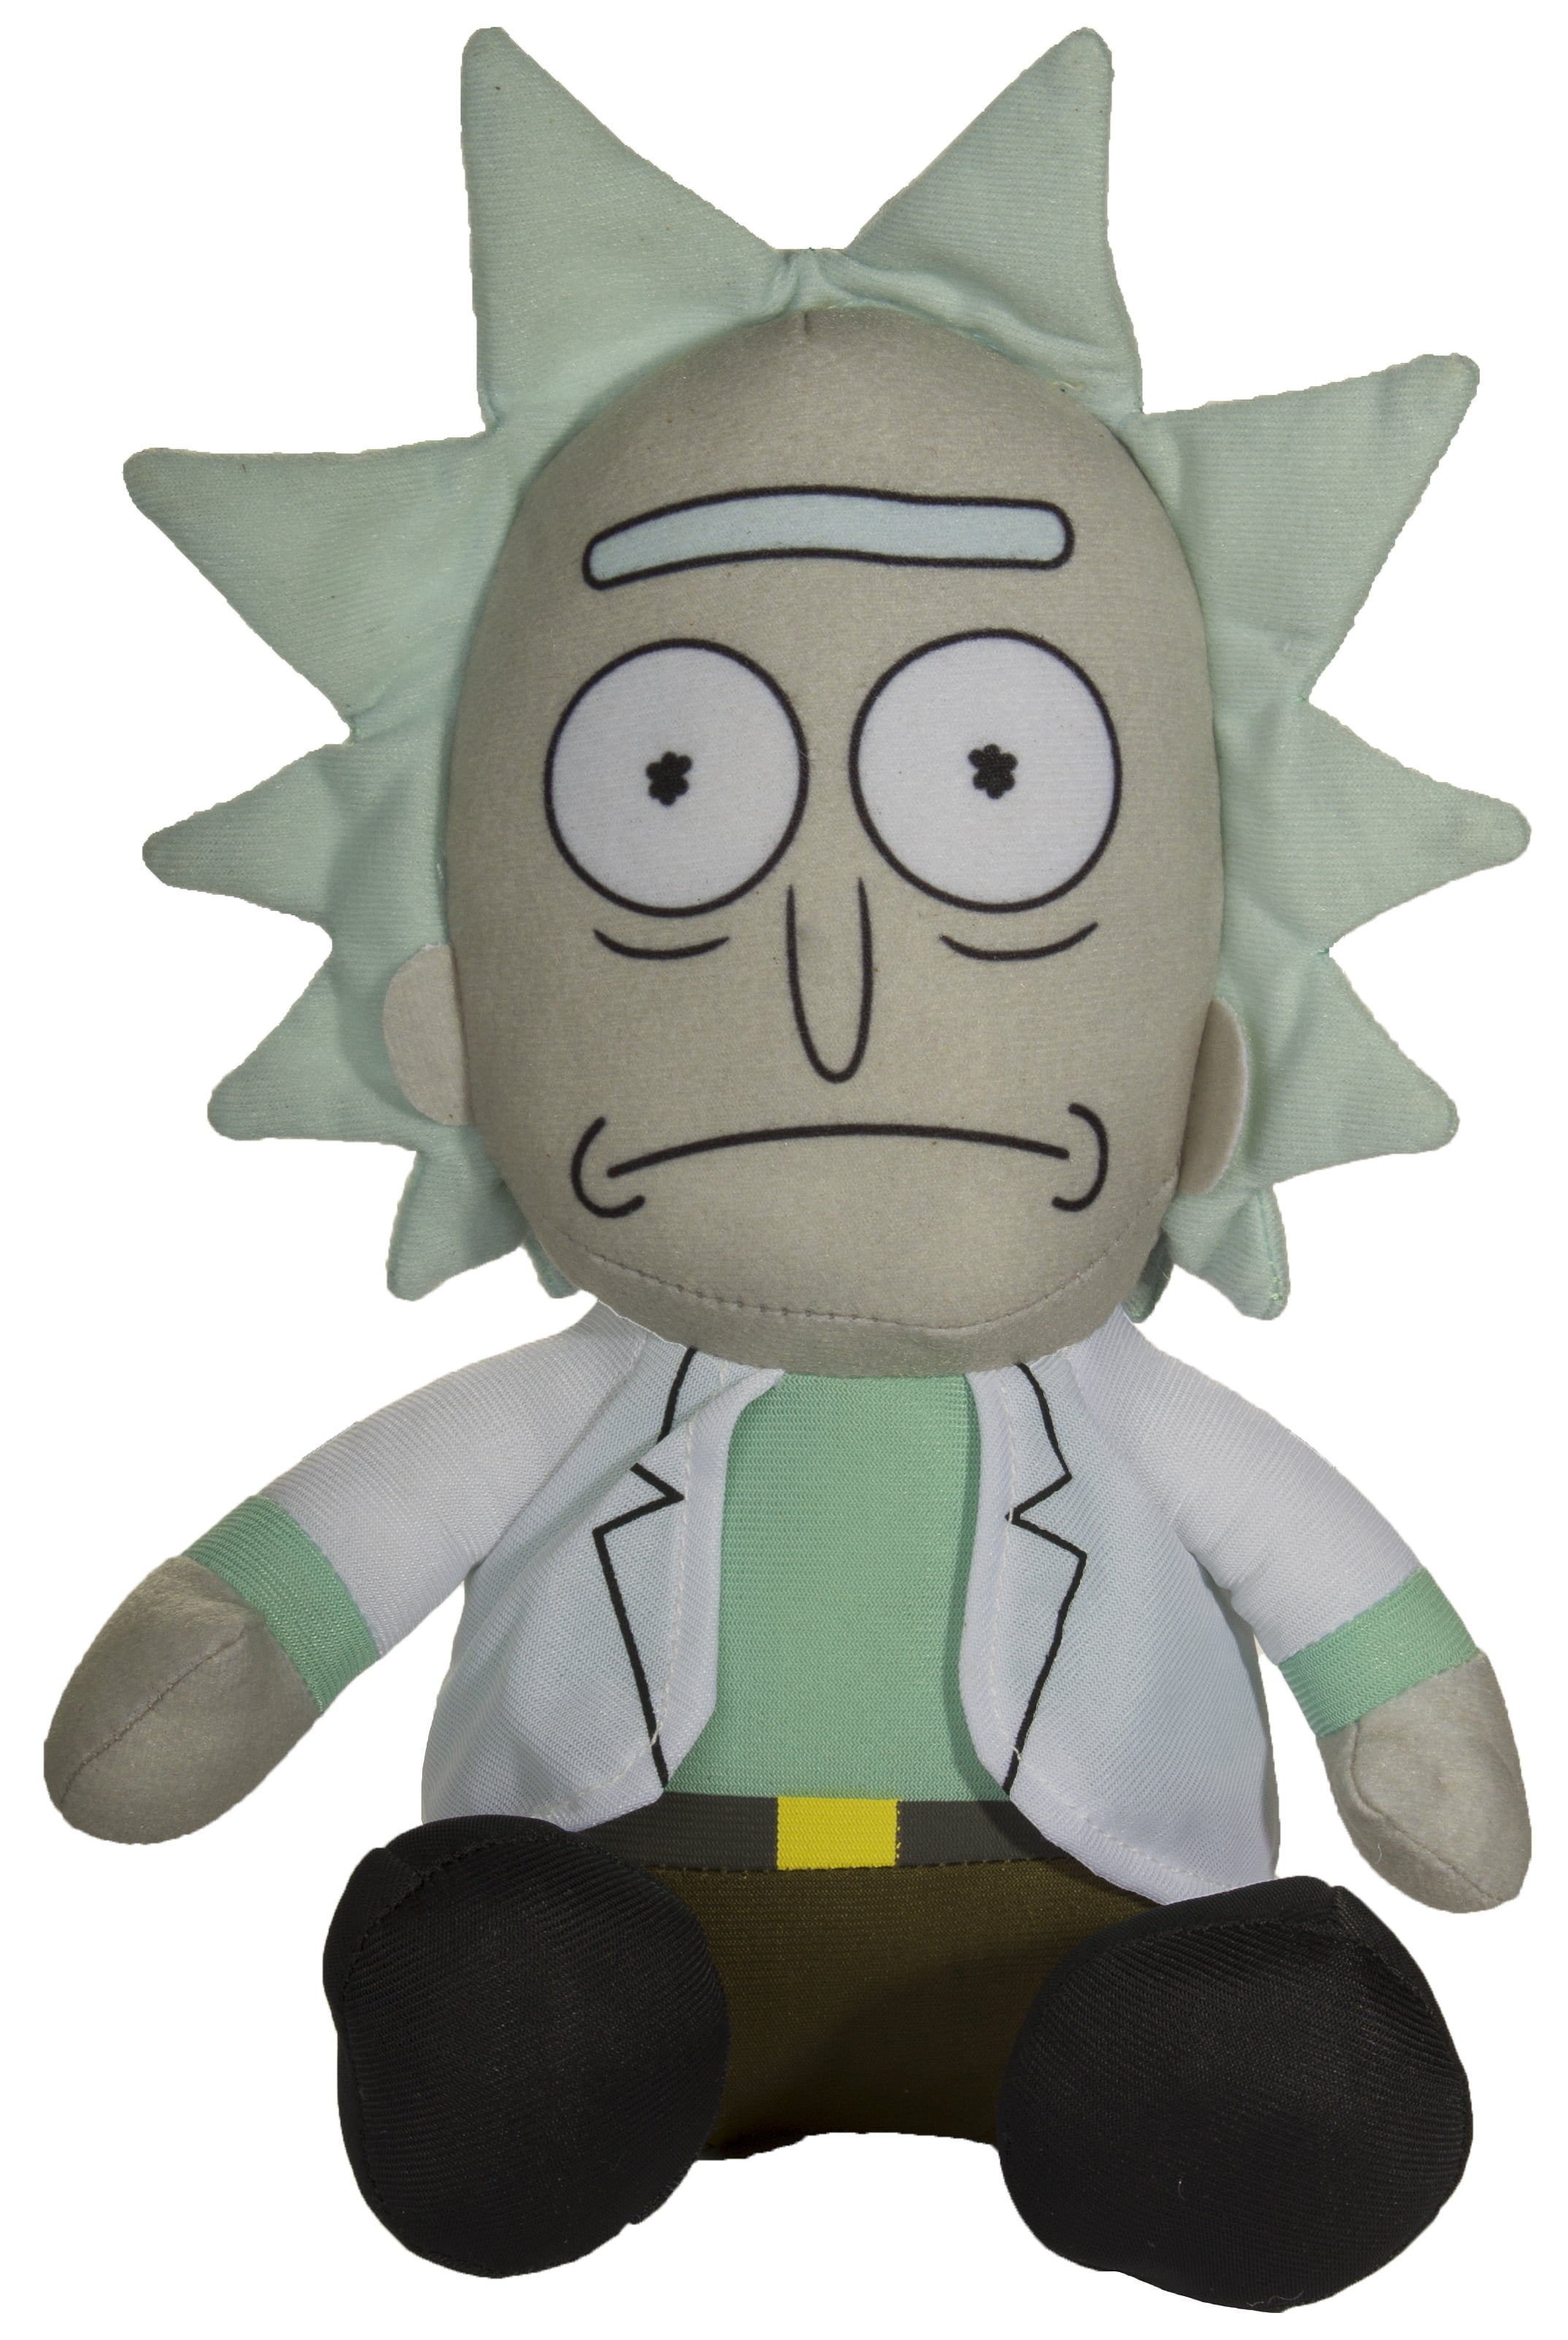 NEW OFFICIAL 12" RICK AND MORTY SMILING RICK SOFT PLUSH TOY NOVELTY GIFT 